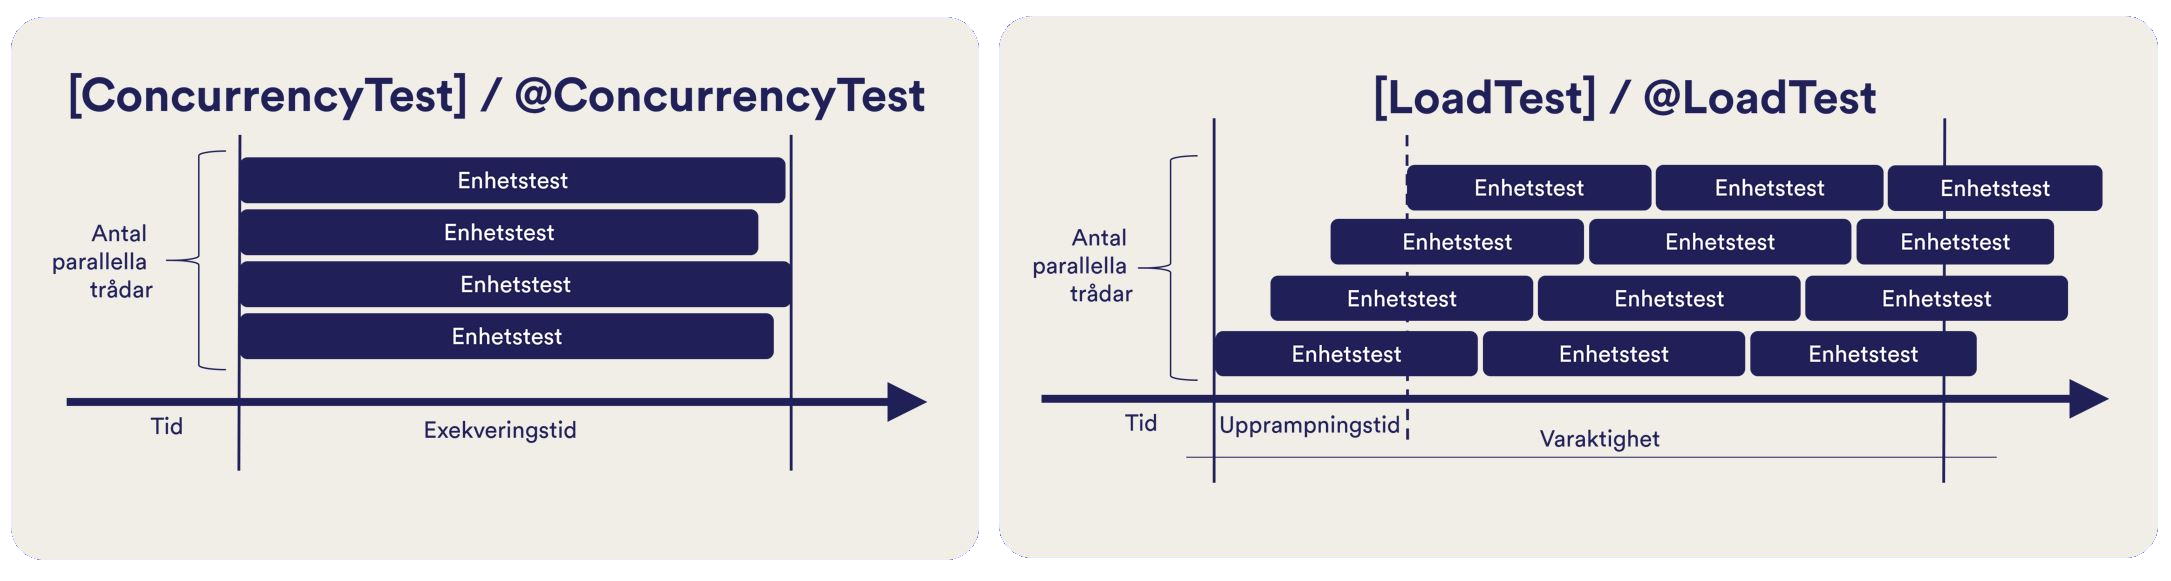 Concurrency test and LoadTest explained